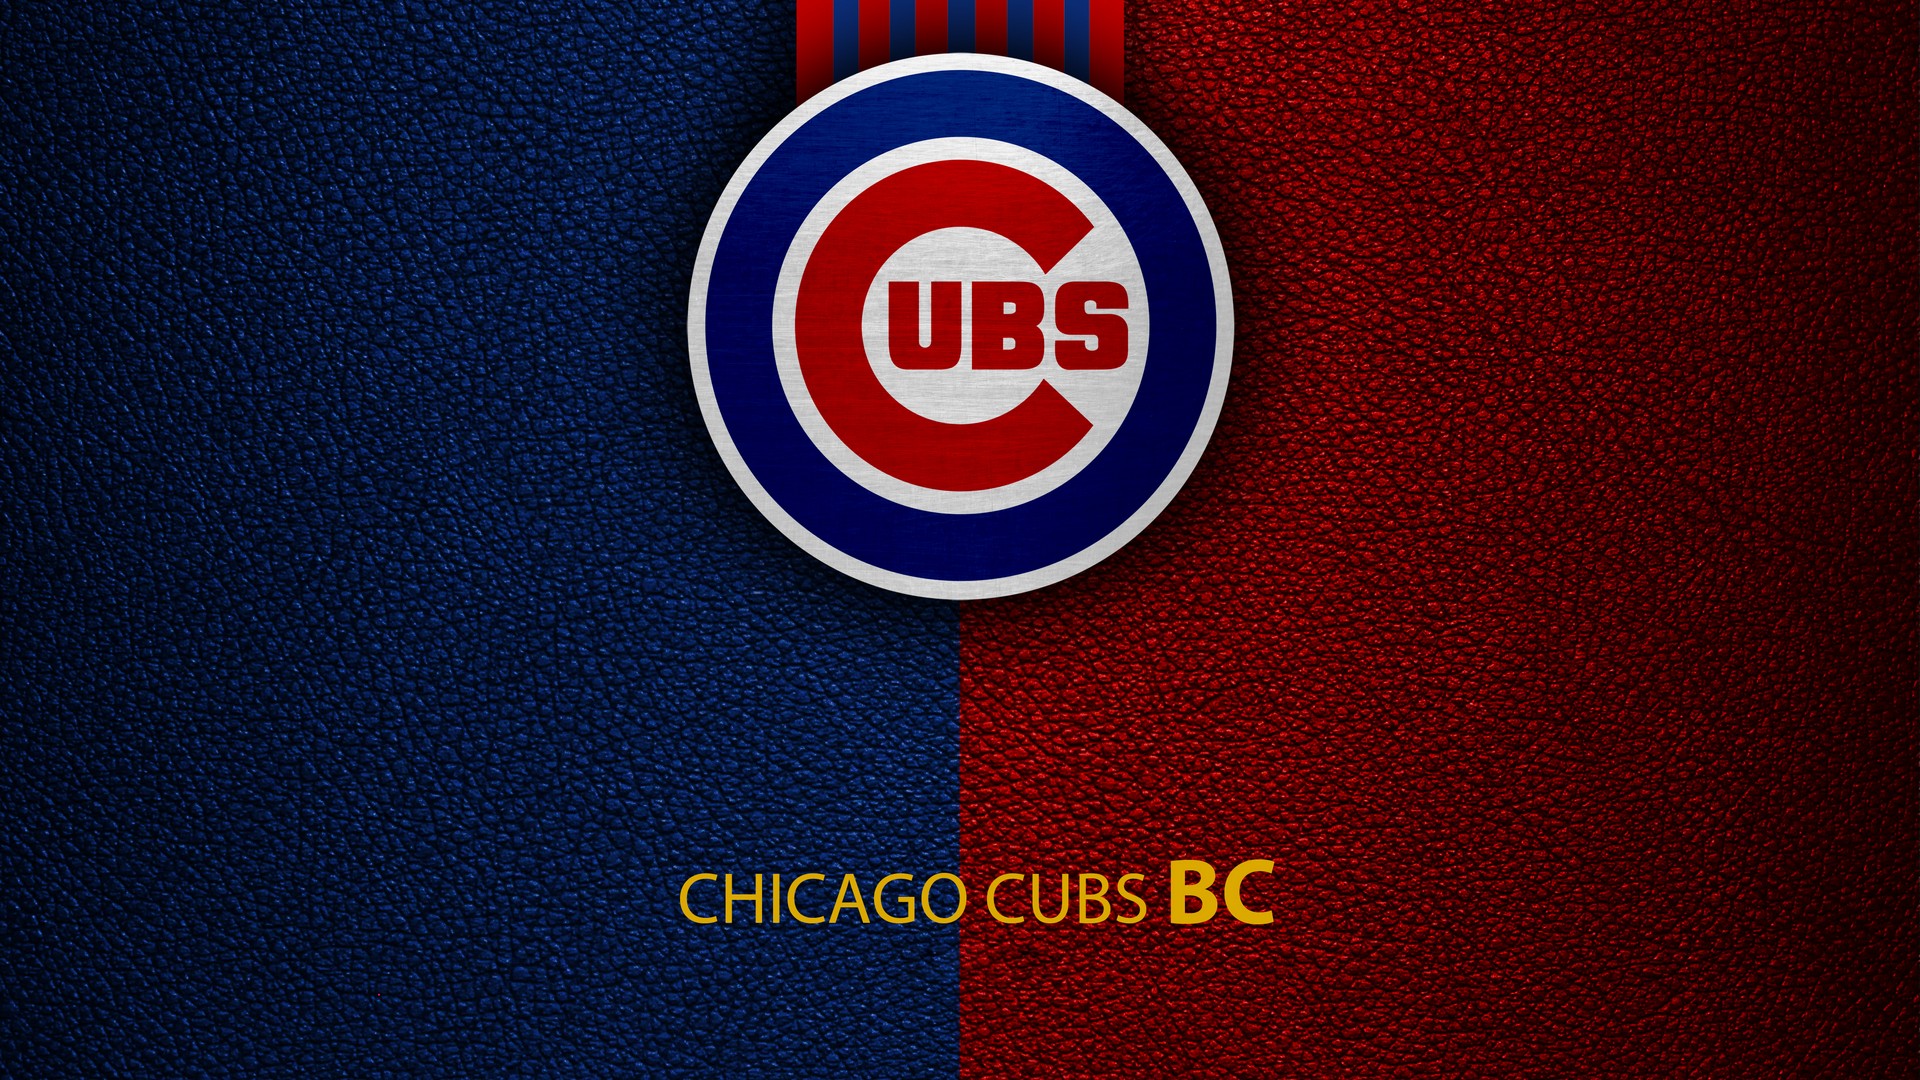 Chicago Cubs Wallpaper with high-resolution 1920x1080 pixel. You can use this wallpaper for Mac Desktop Wallpaper, Laptop Screensavers, Android Wallpapers, Tablet or iPhone Home Screen and another mobile phone device